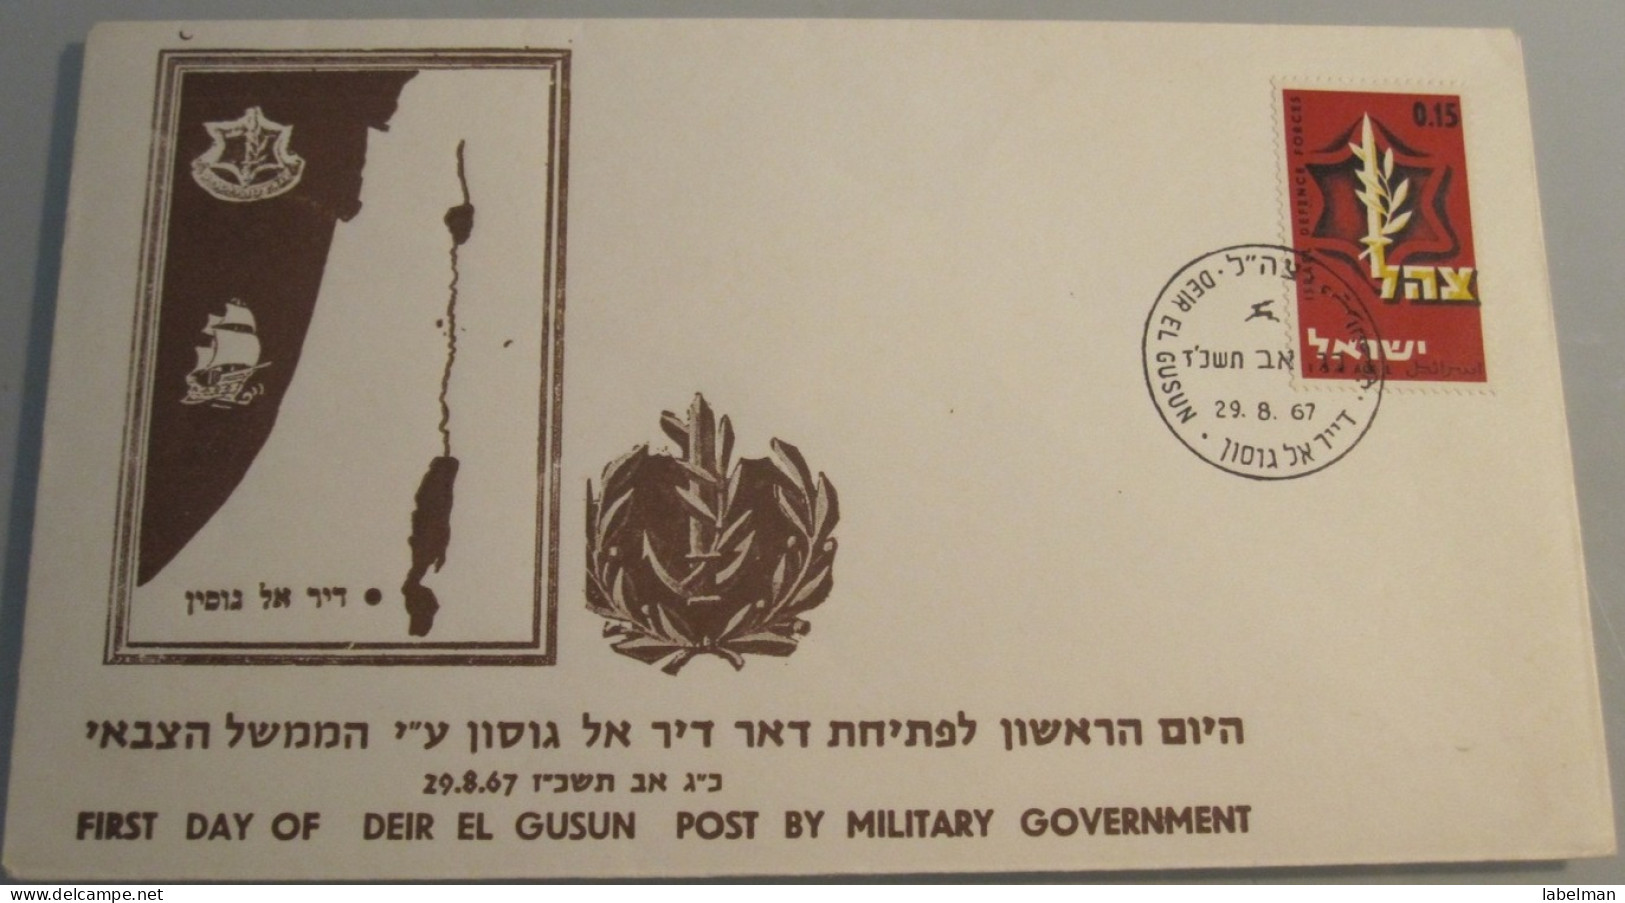 1967 POO FIRST DAY POST OFFICE OPENING MILITARY GOVERNMENT DEIR EL GUSUN JORDAN MAIL STAMP COVER ENVELOPE ISRAEL CACHET - Covers & Documents